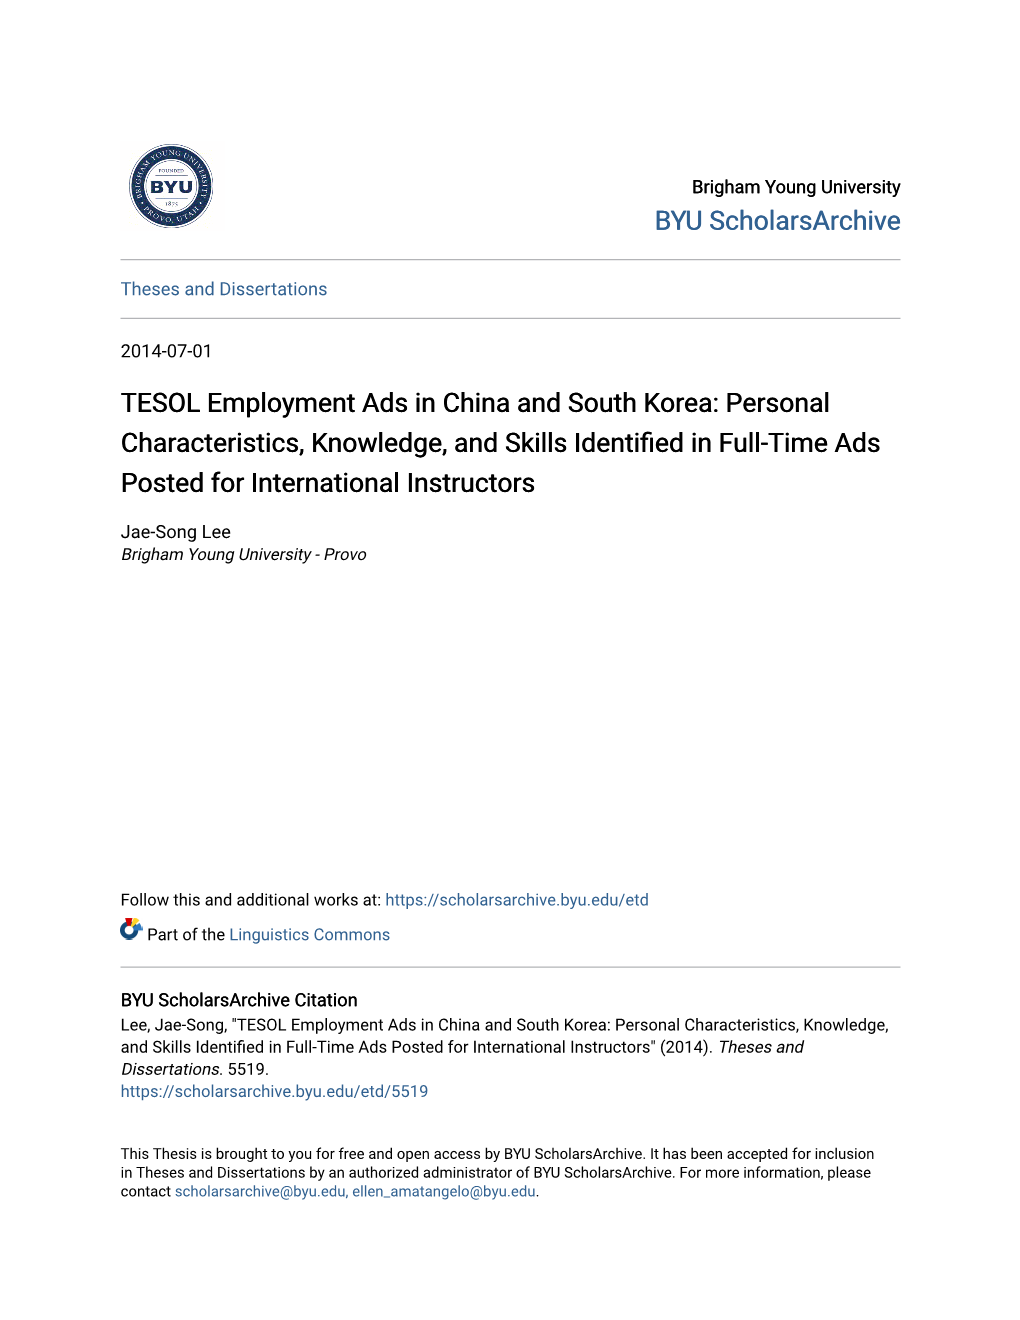 TESOL Employment Ads in China and South Korea: Personal Characteristics, Knowledge, and Skills Identified in Full-Time Ads Posted for International Instructors